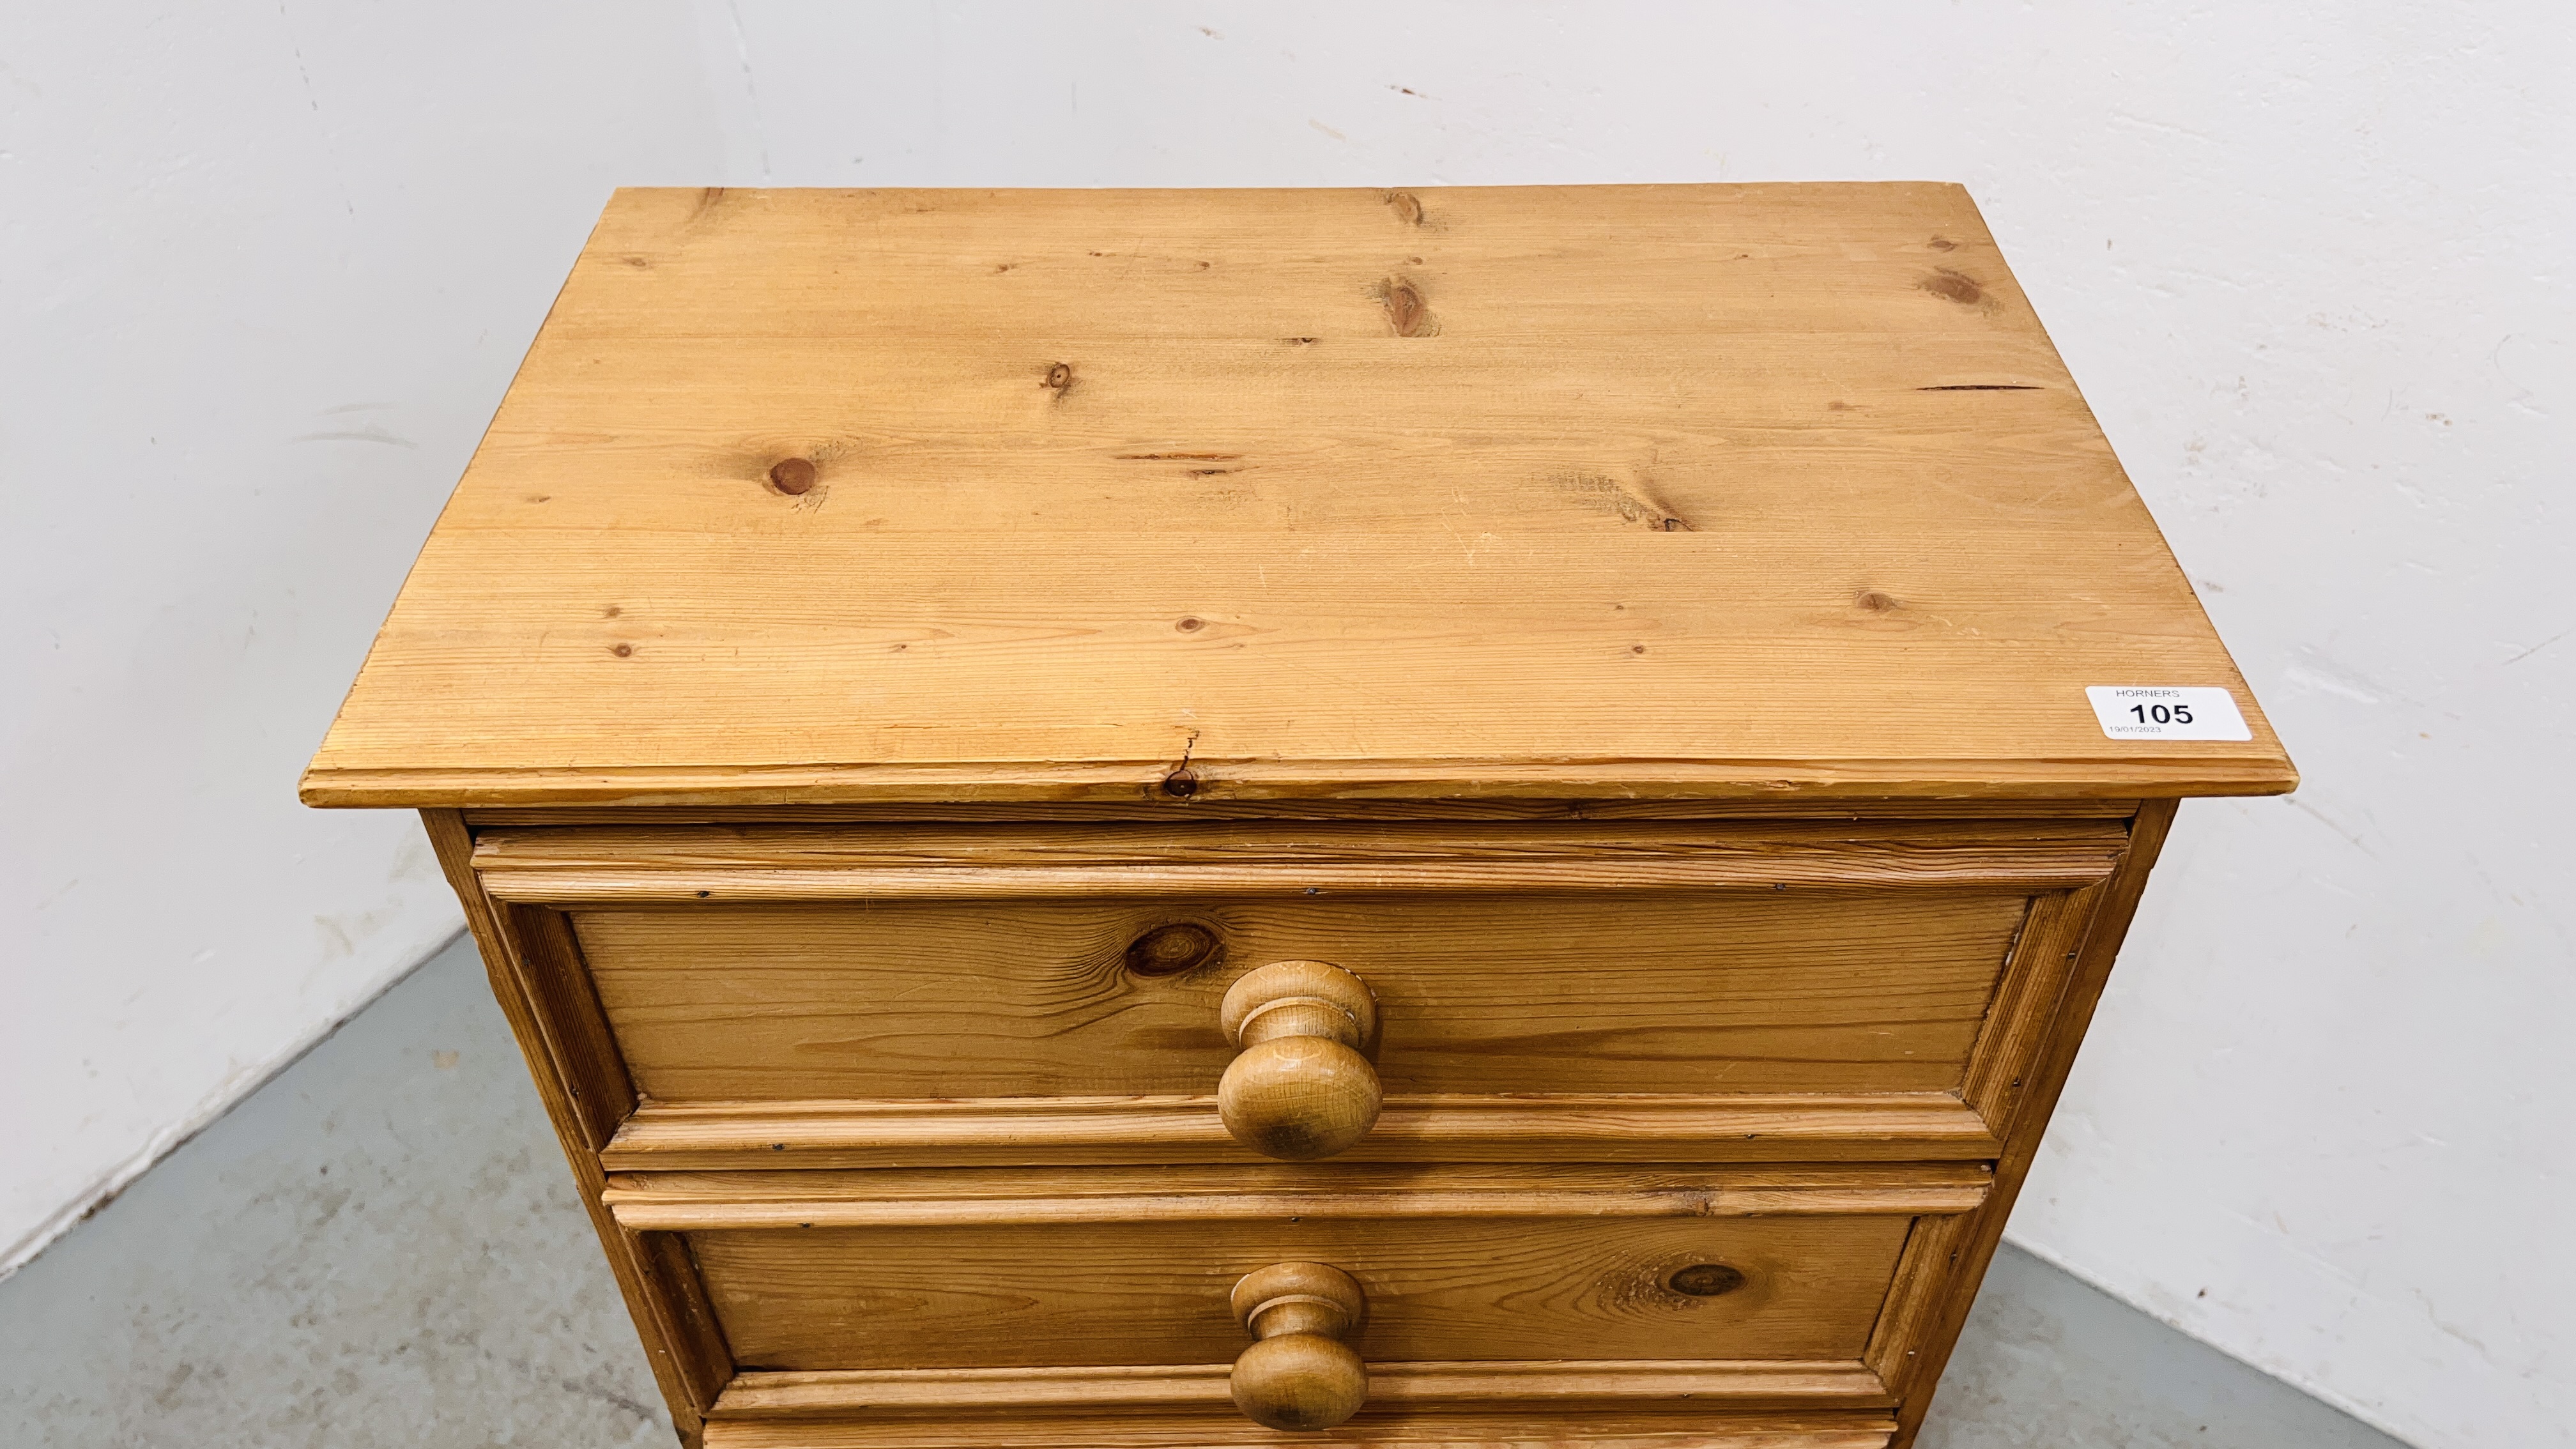 WAXED PINE SIX DRAWER TOWER CHEST HEIGHT 106CM. WIDTH 52CM. DEPTH 32CM. - Image 3 of 9